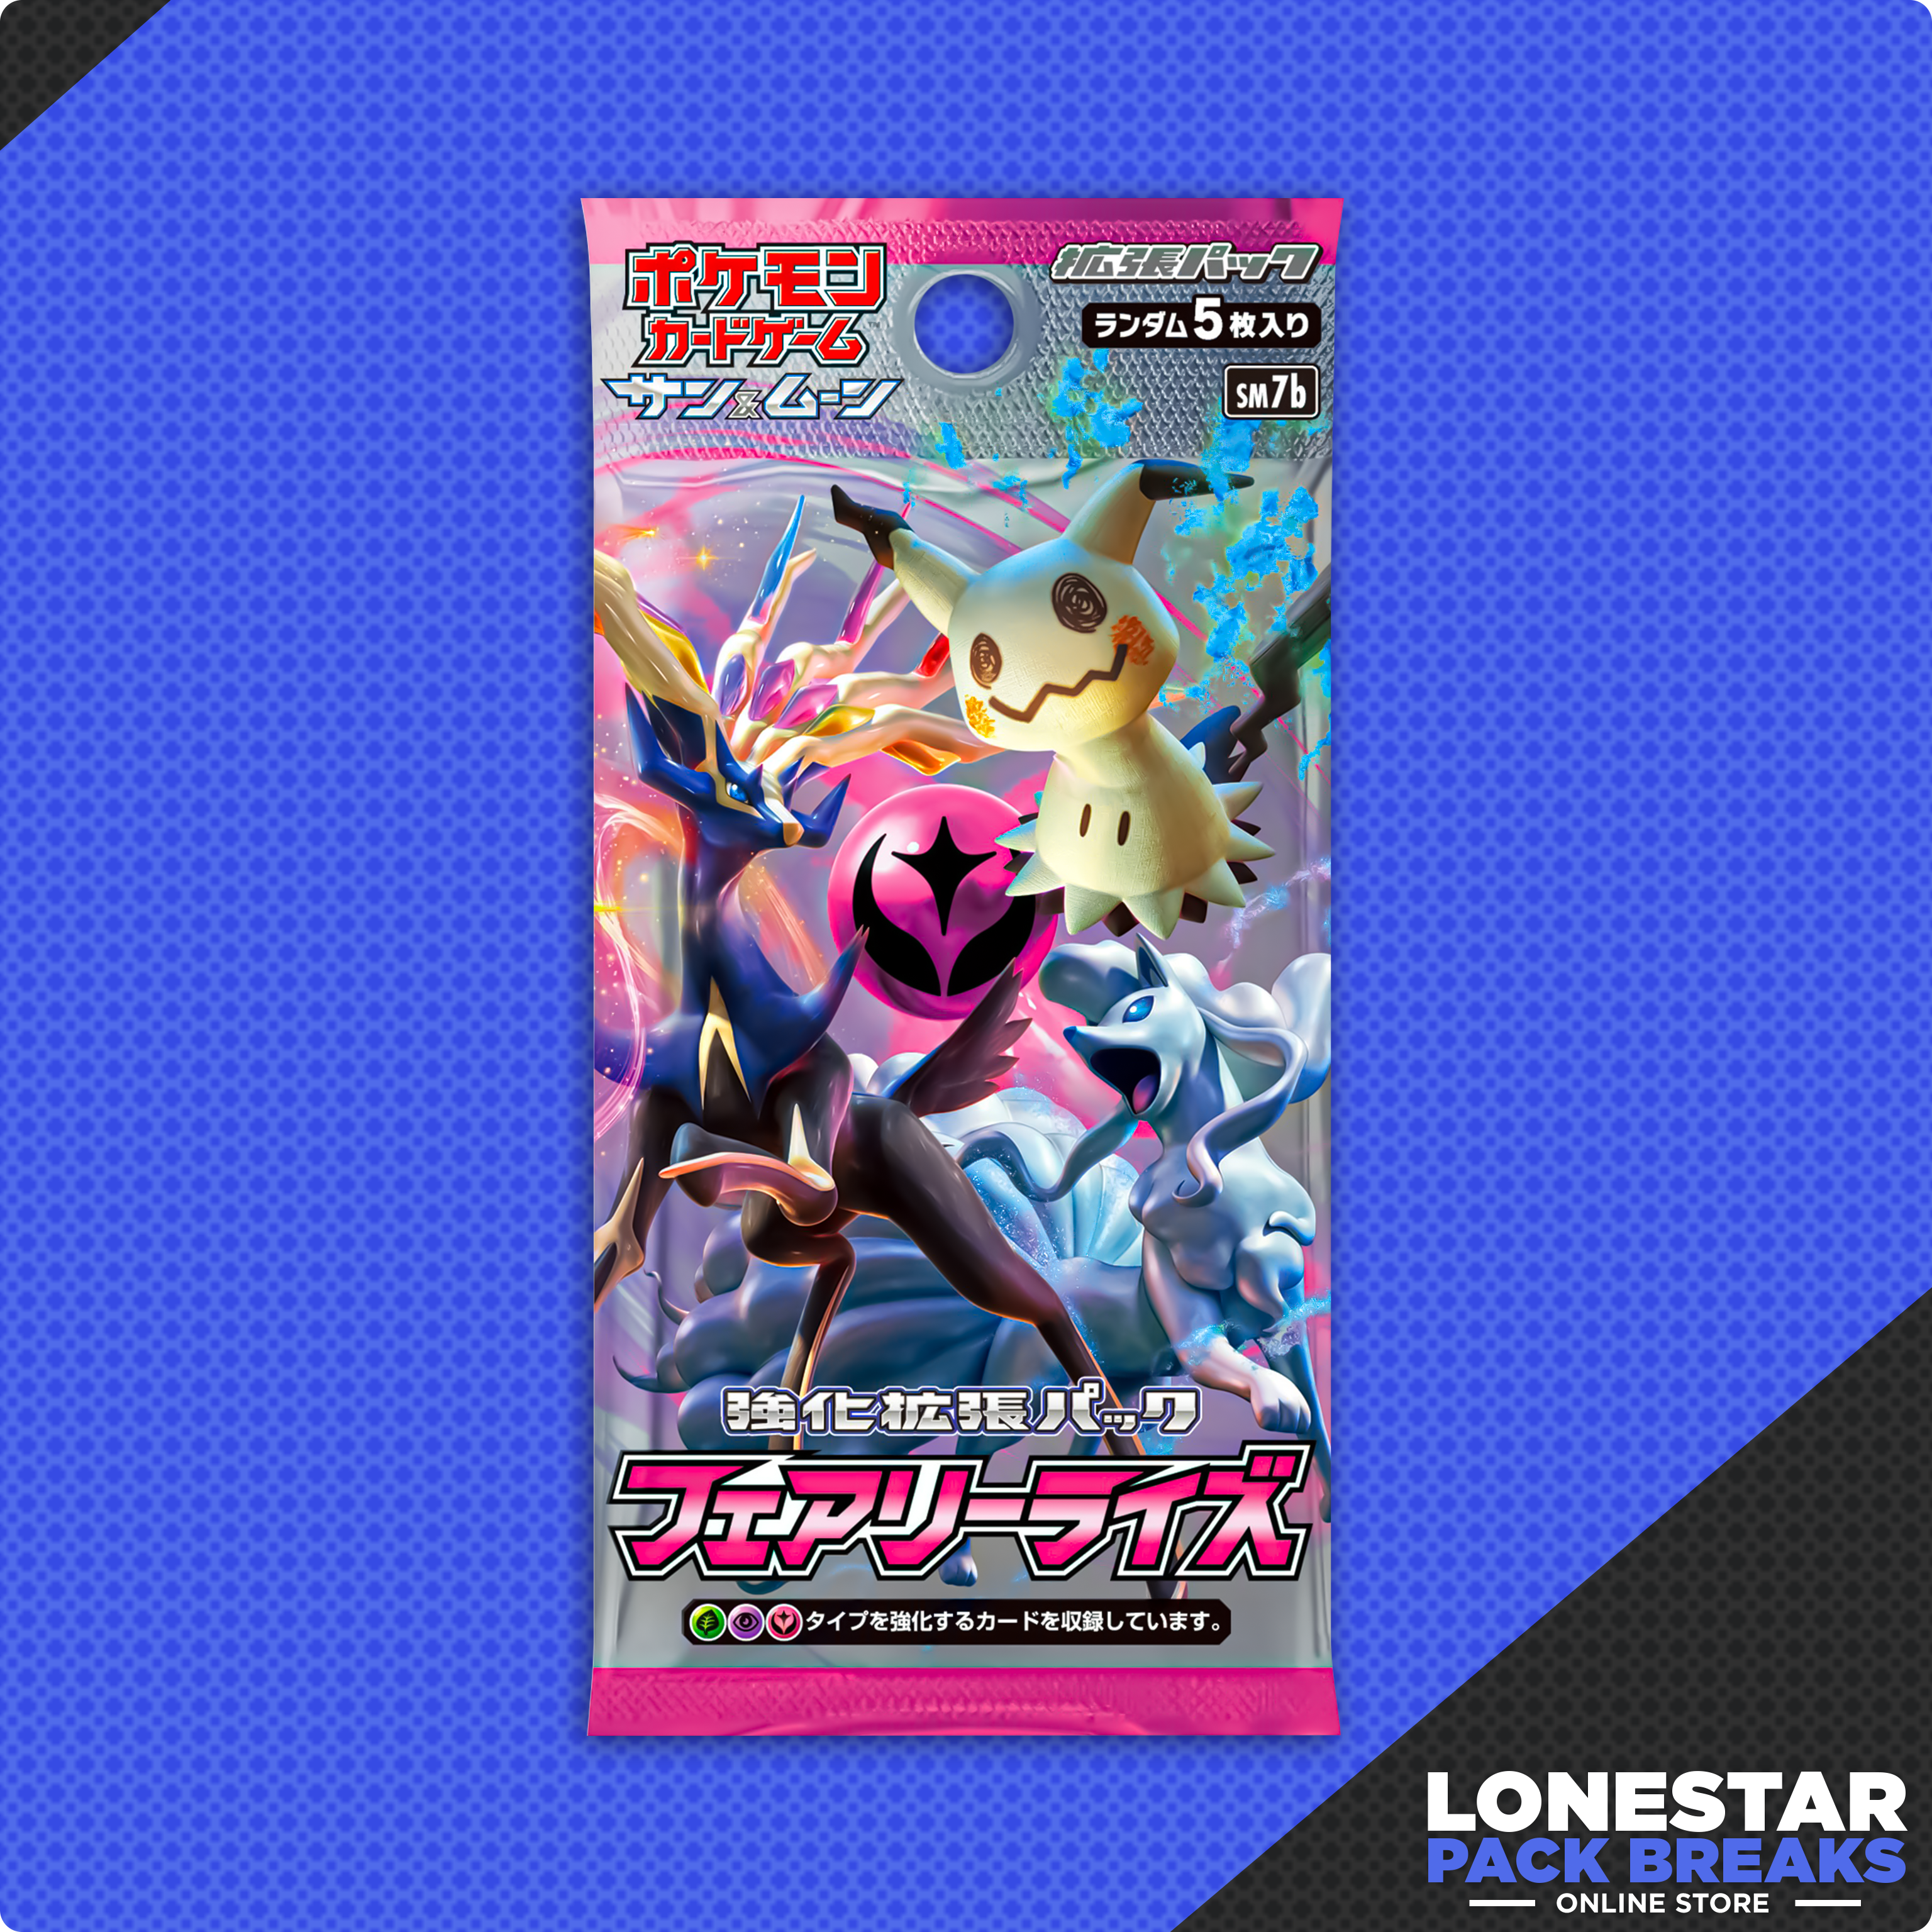 Fairy Rise SM7b Booster Pack-Japanese